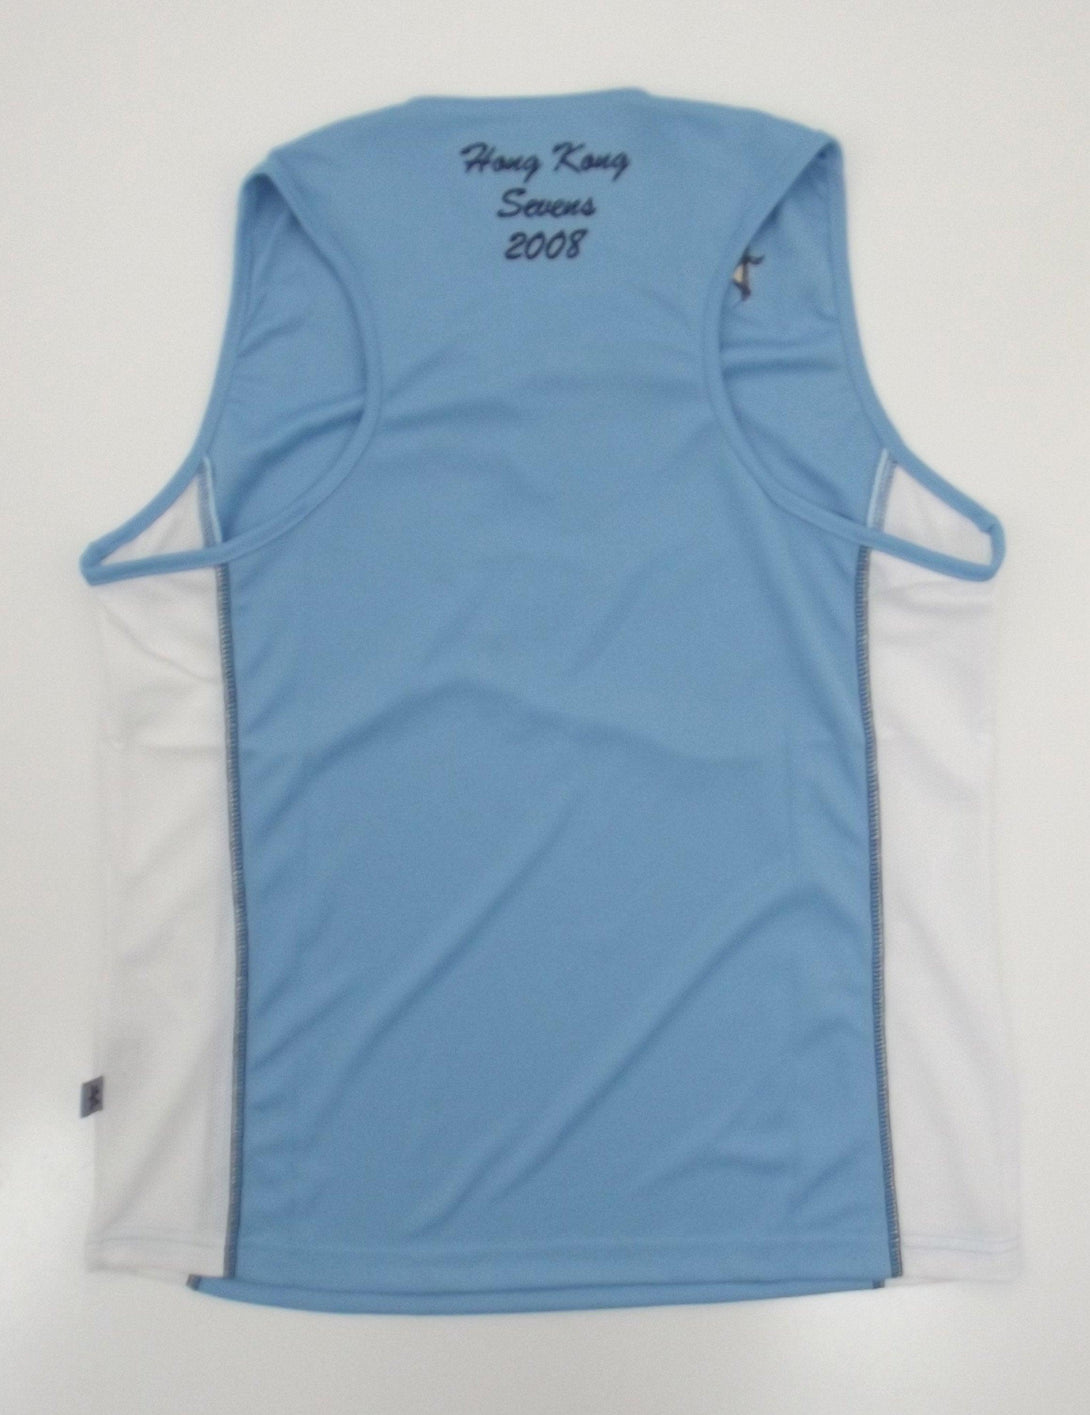 Rugby Heaven Kukri Athletic Top Womens - www.rugby-heaven.co.uk